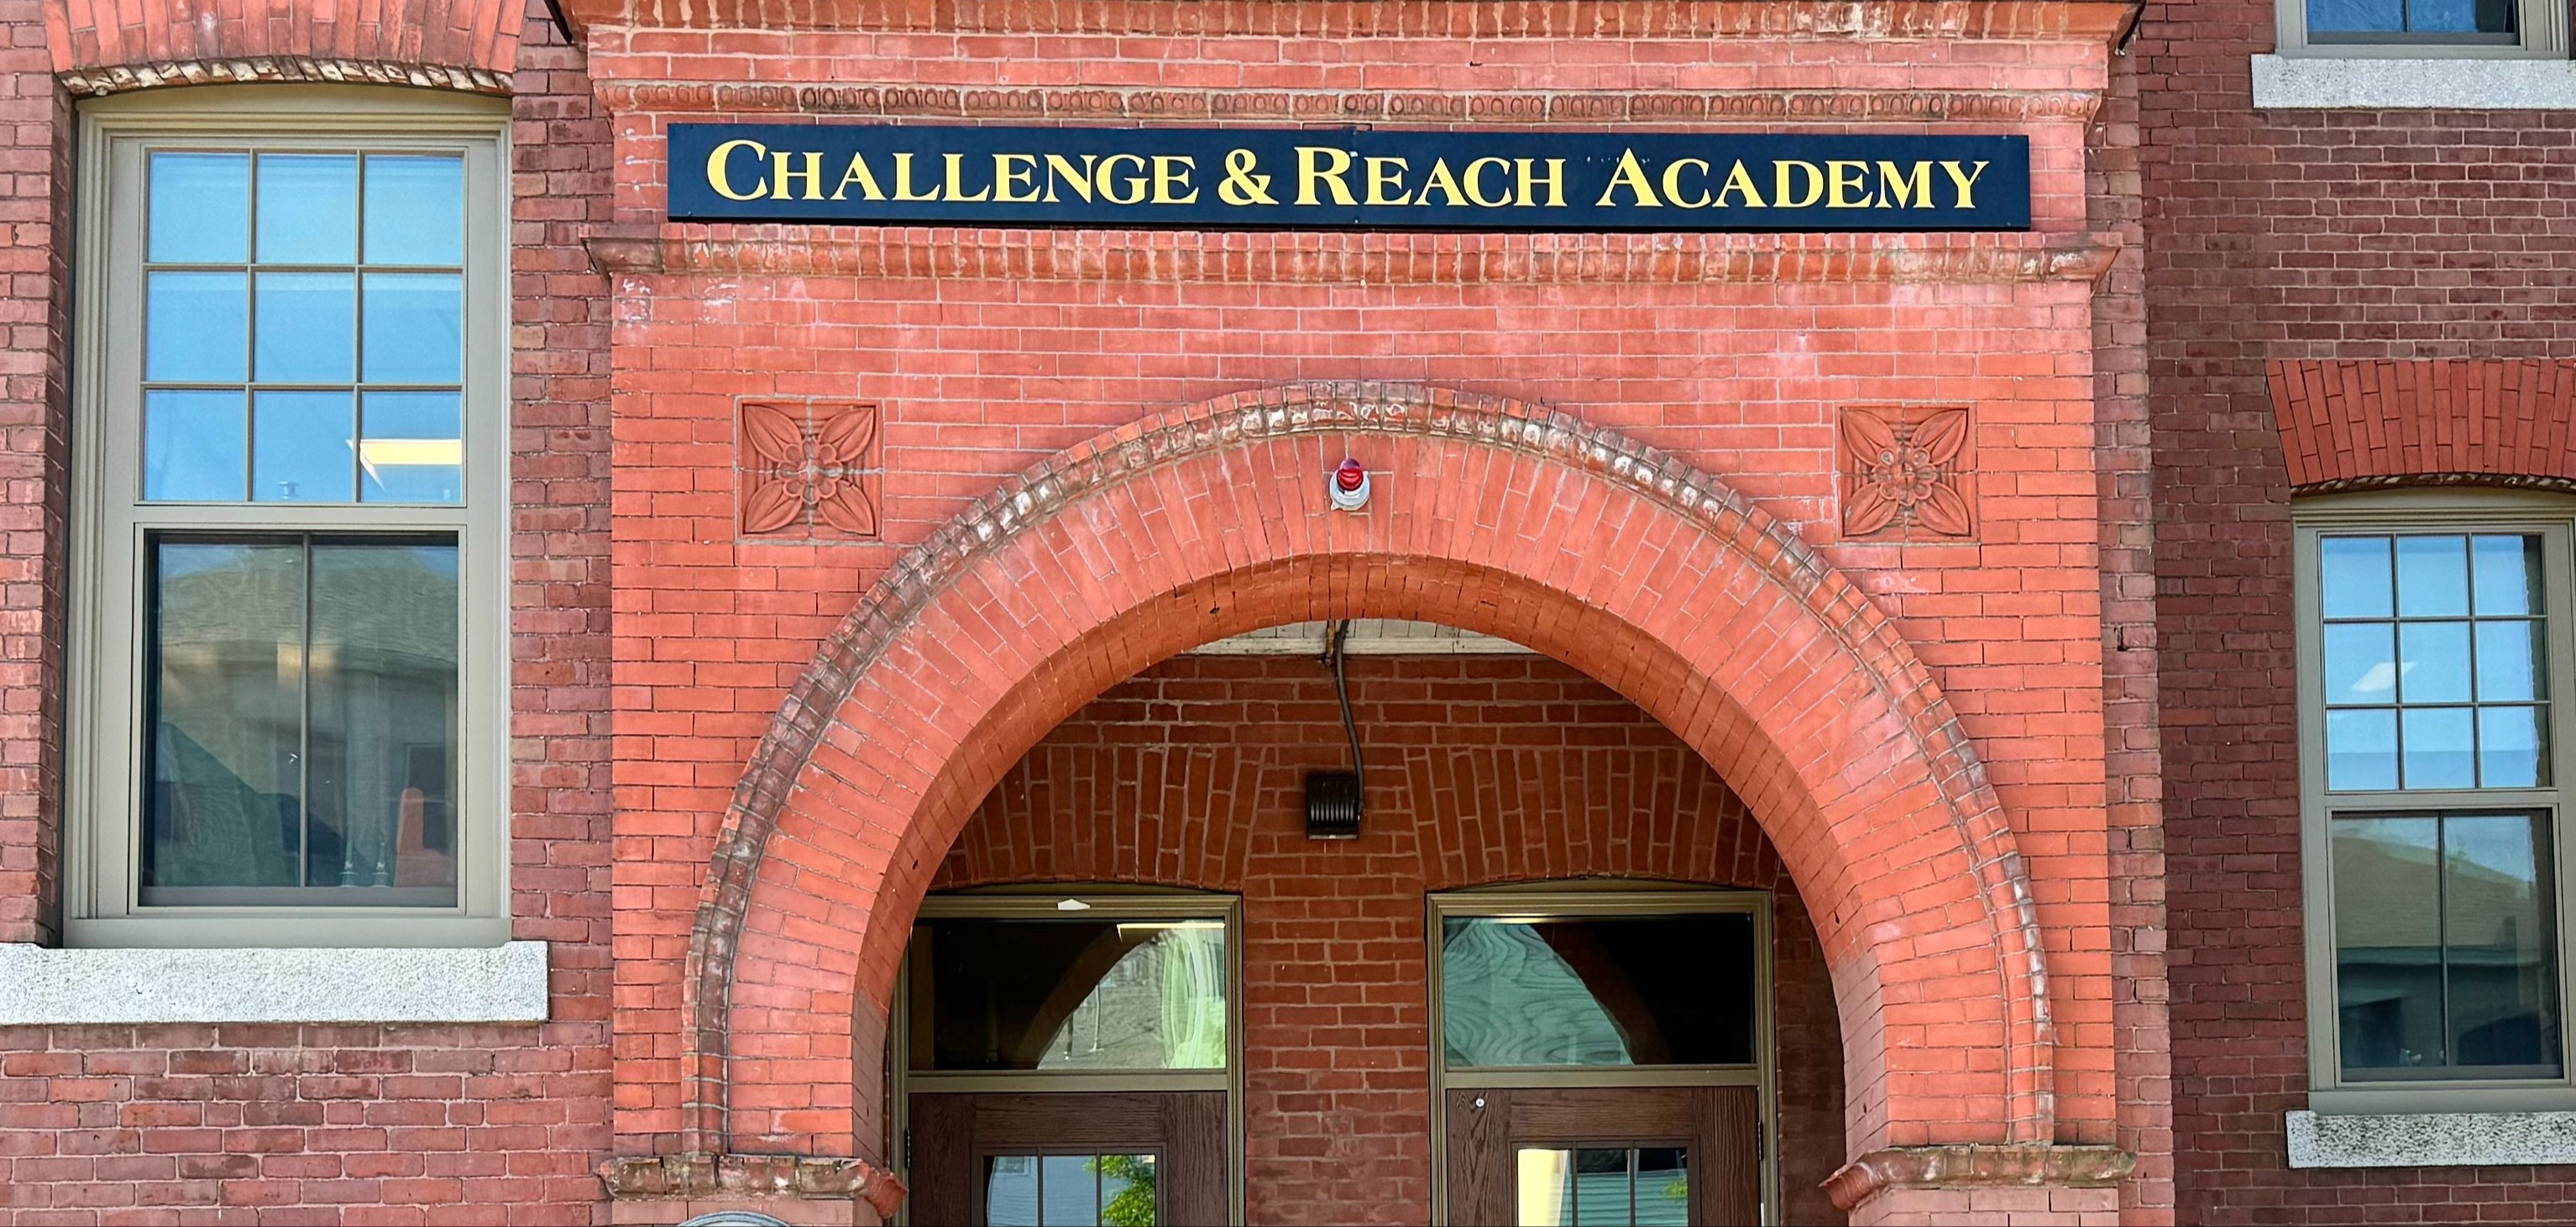 Welcome to Challenge & Reach Academy